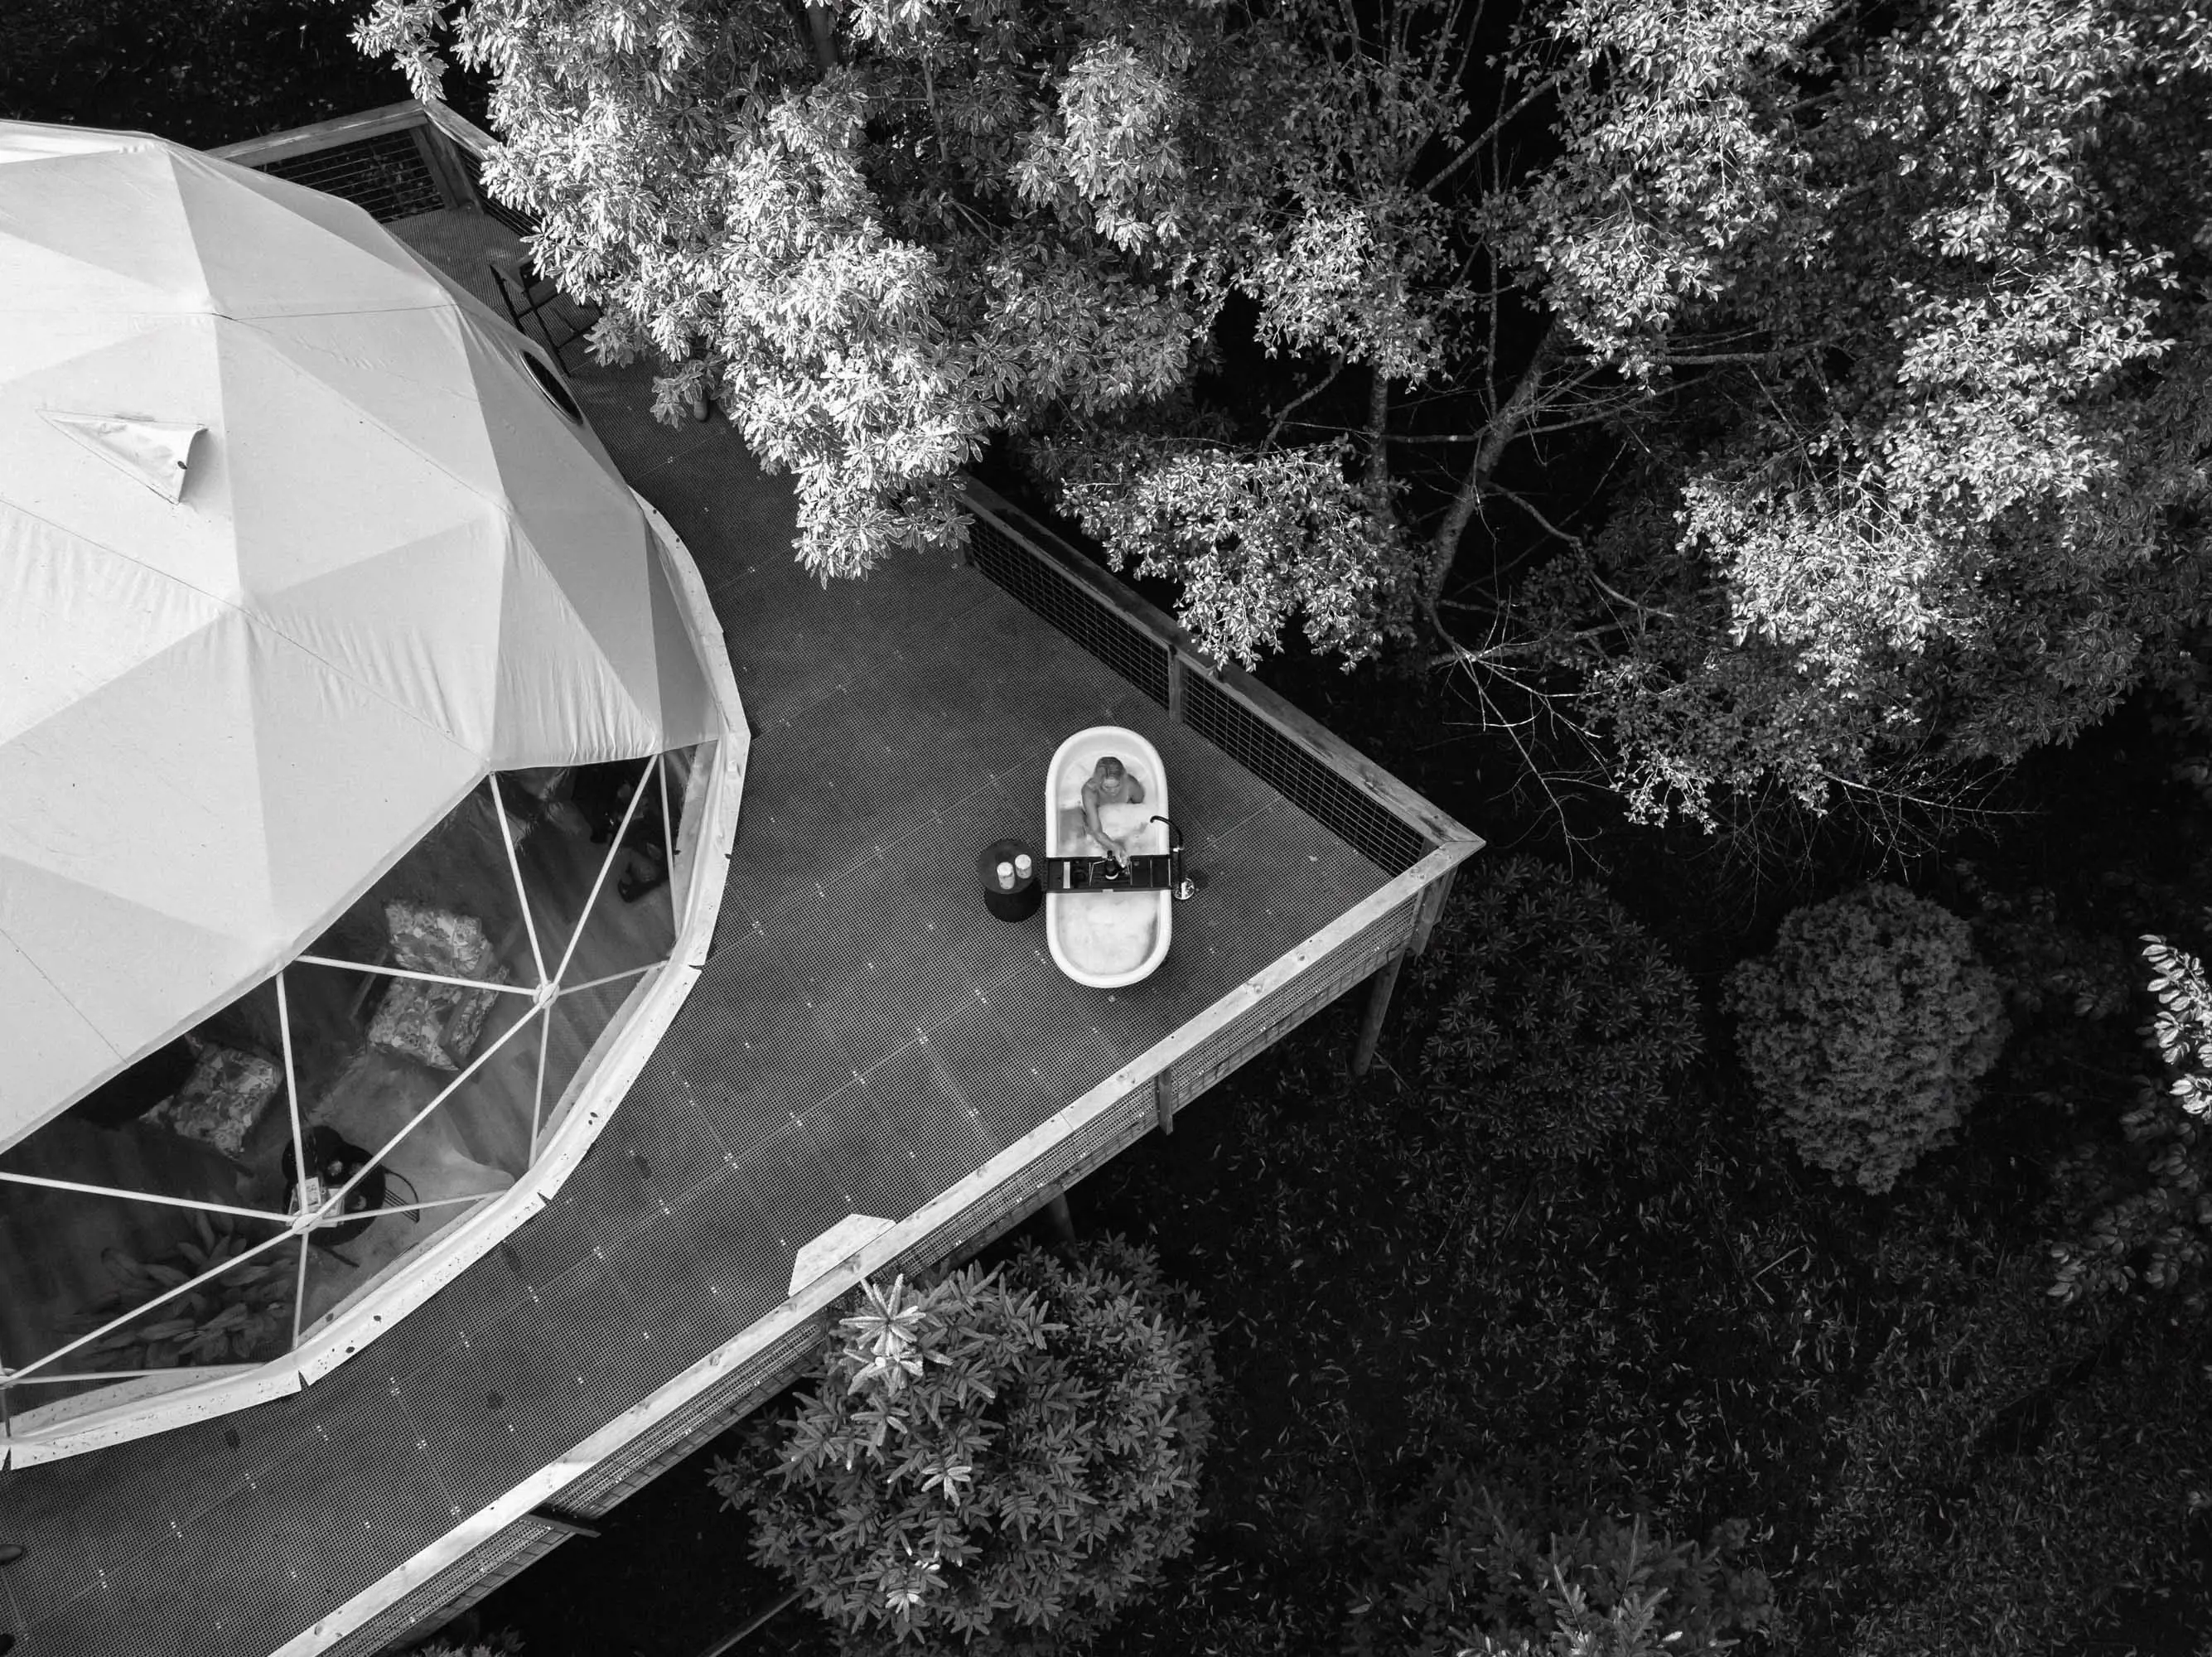 An aerial view of a large icosahedron-shaped tent with large, triangular window panels sits on a platform in the forest. A woman sits in a bath in one corner of the platform.